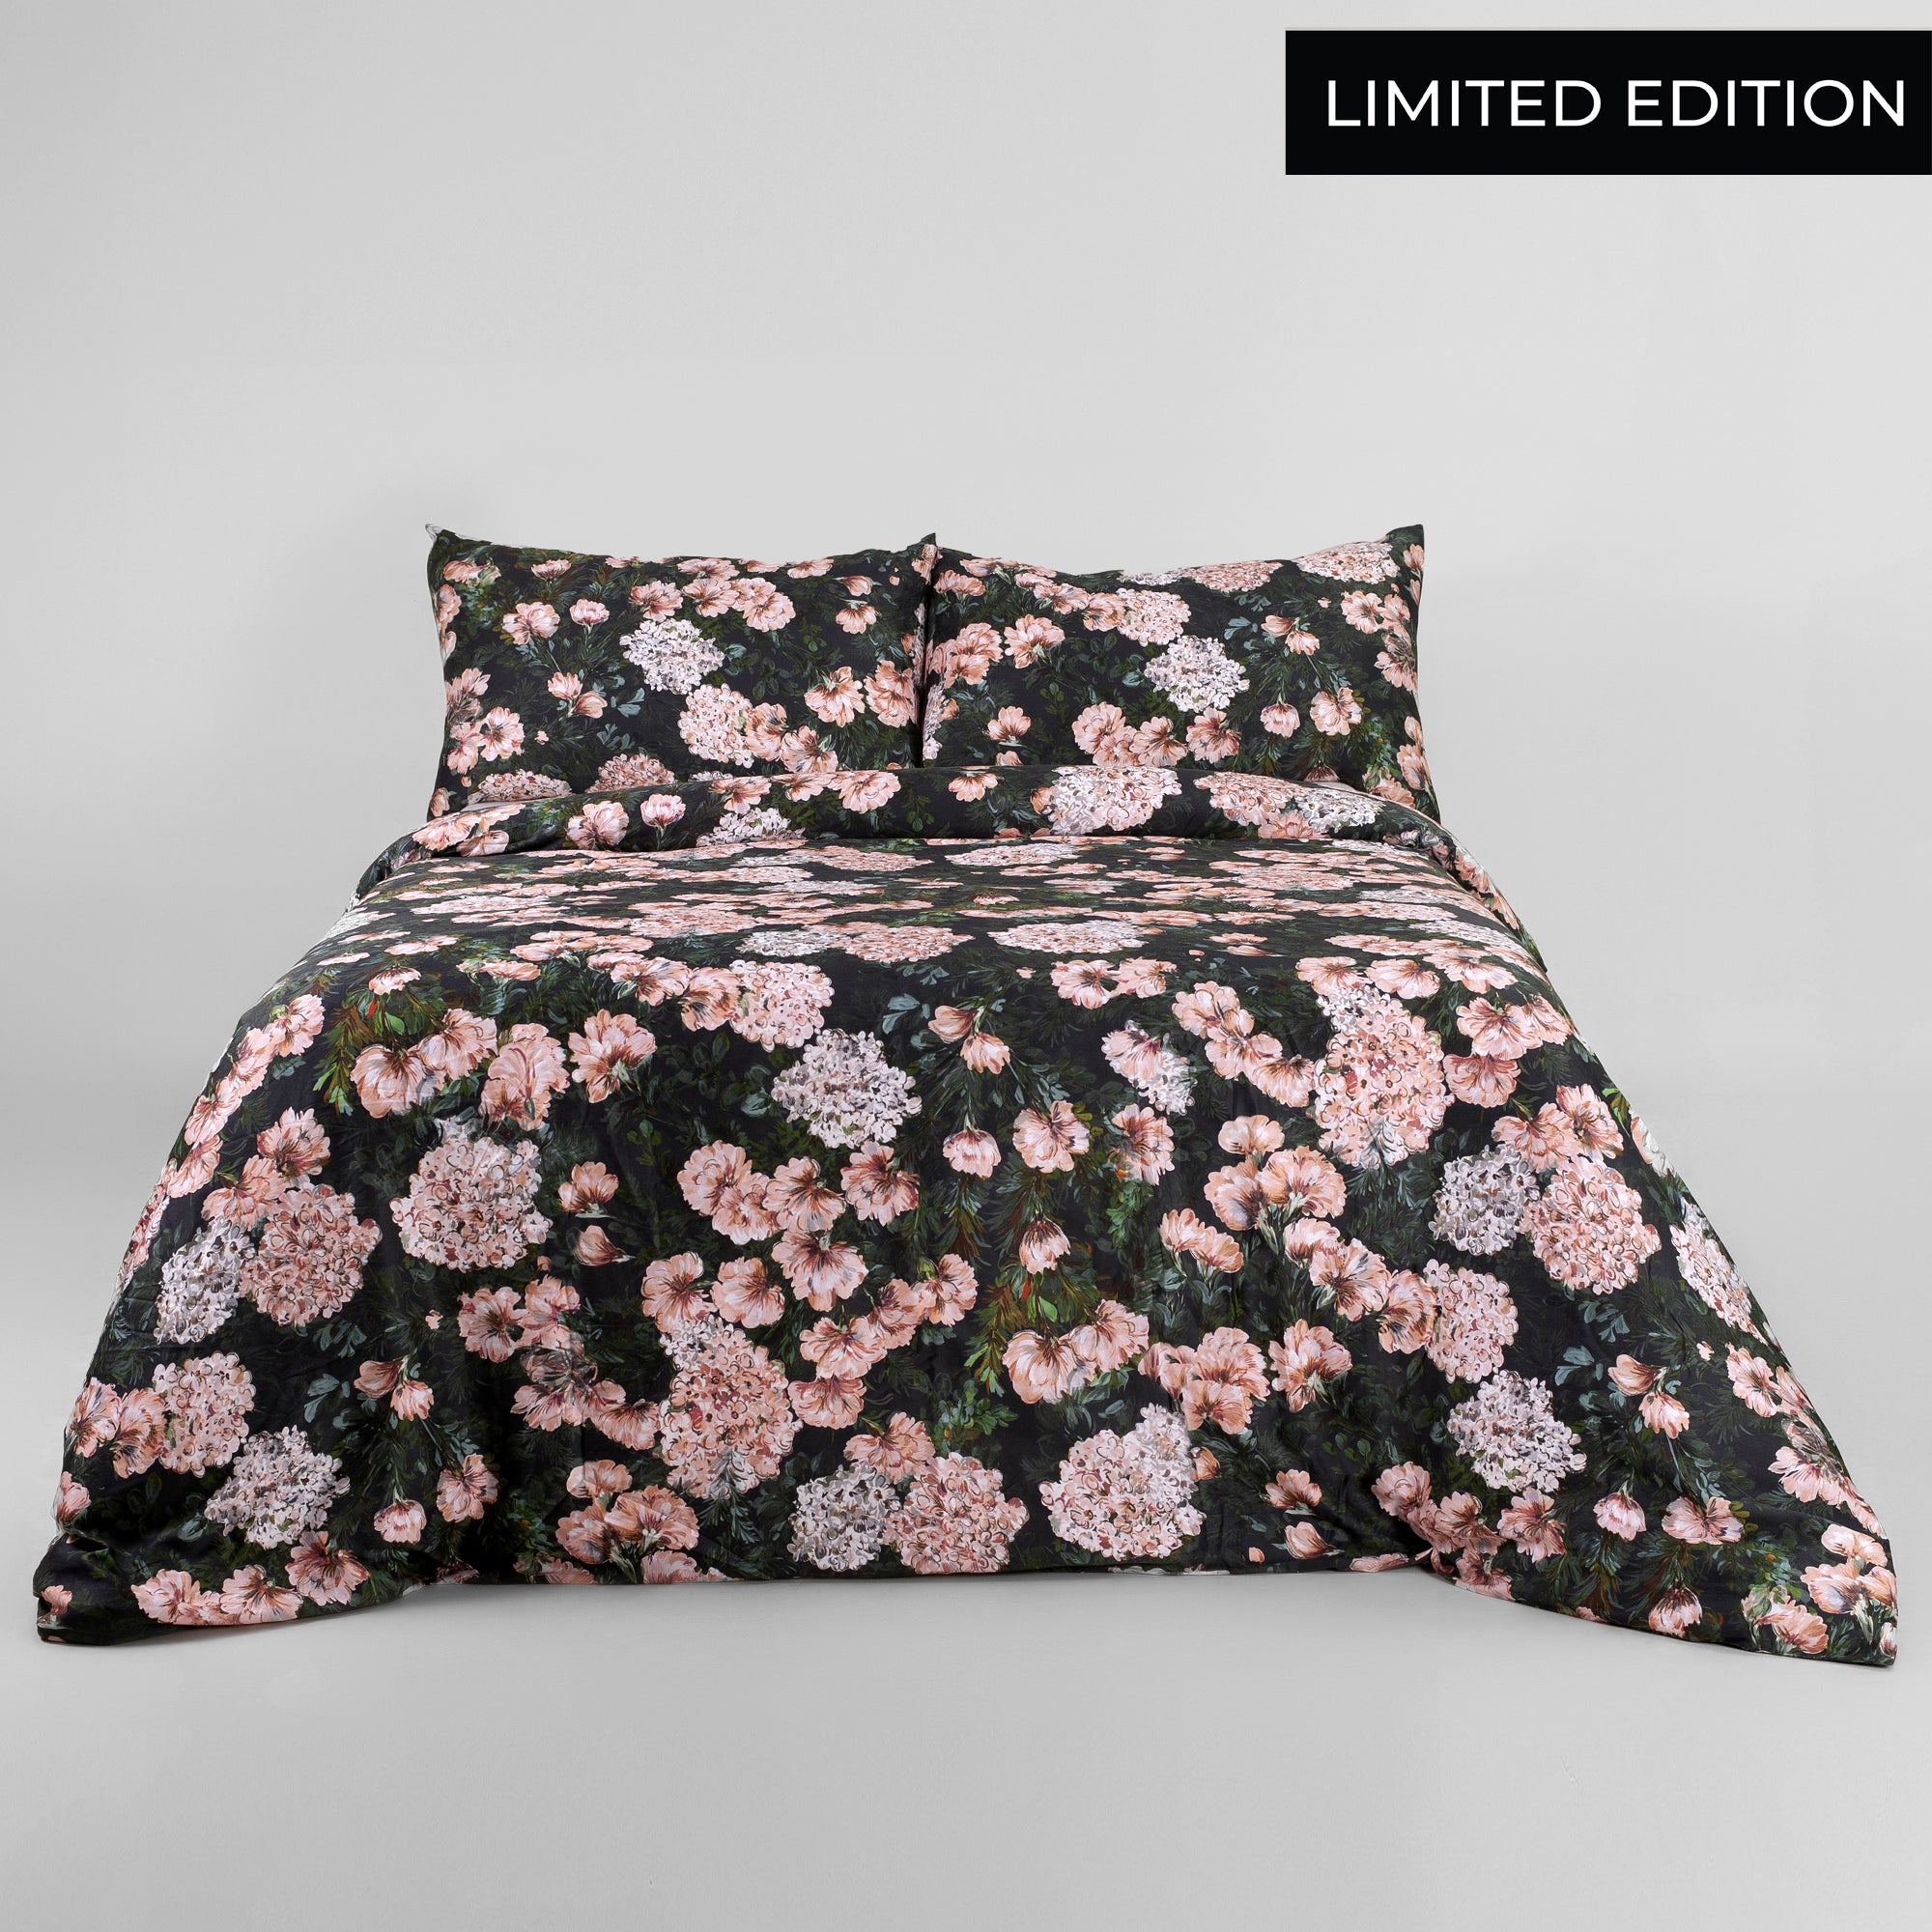 The Linen Company Bedding Bewitched Duvet Cover Set